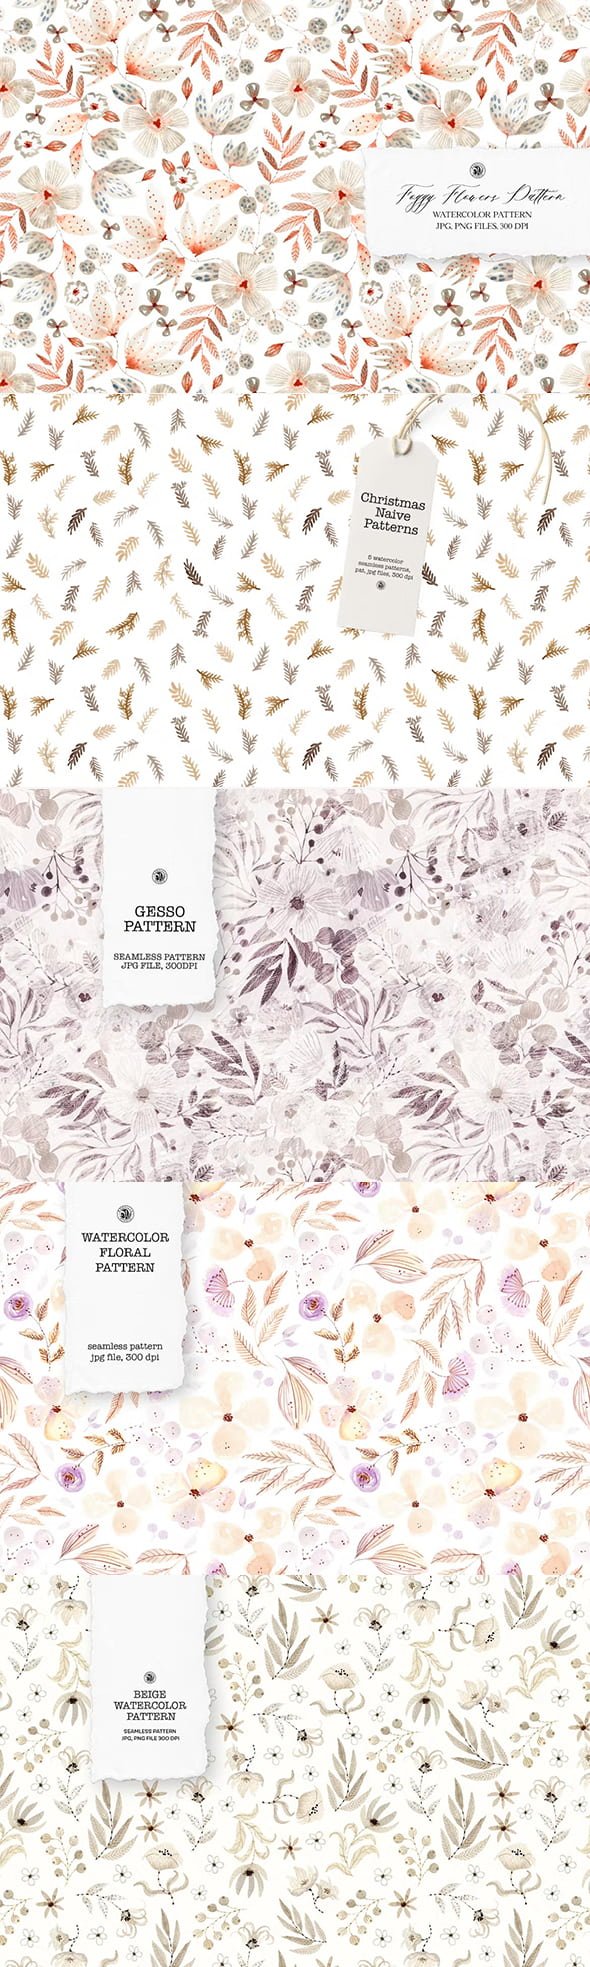 Delicate Watercolor Patterns Collection